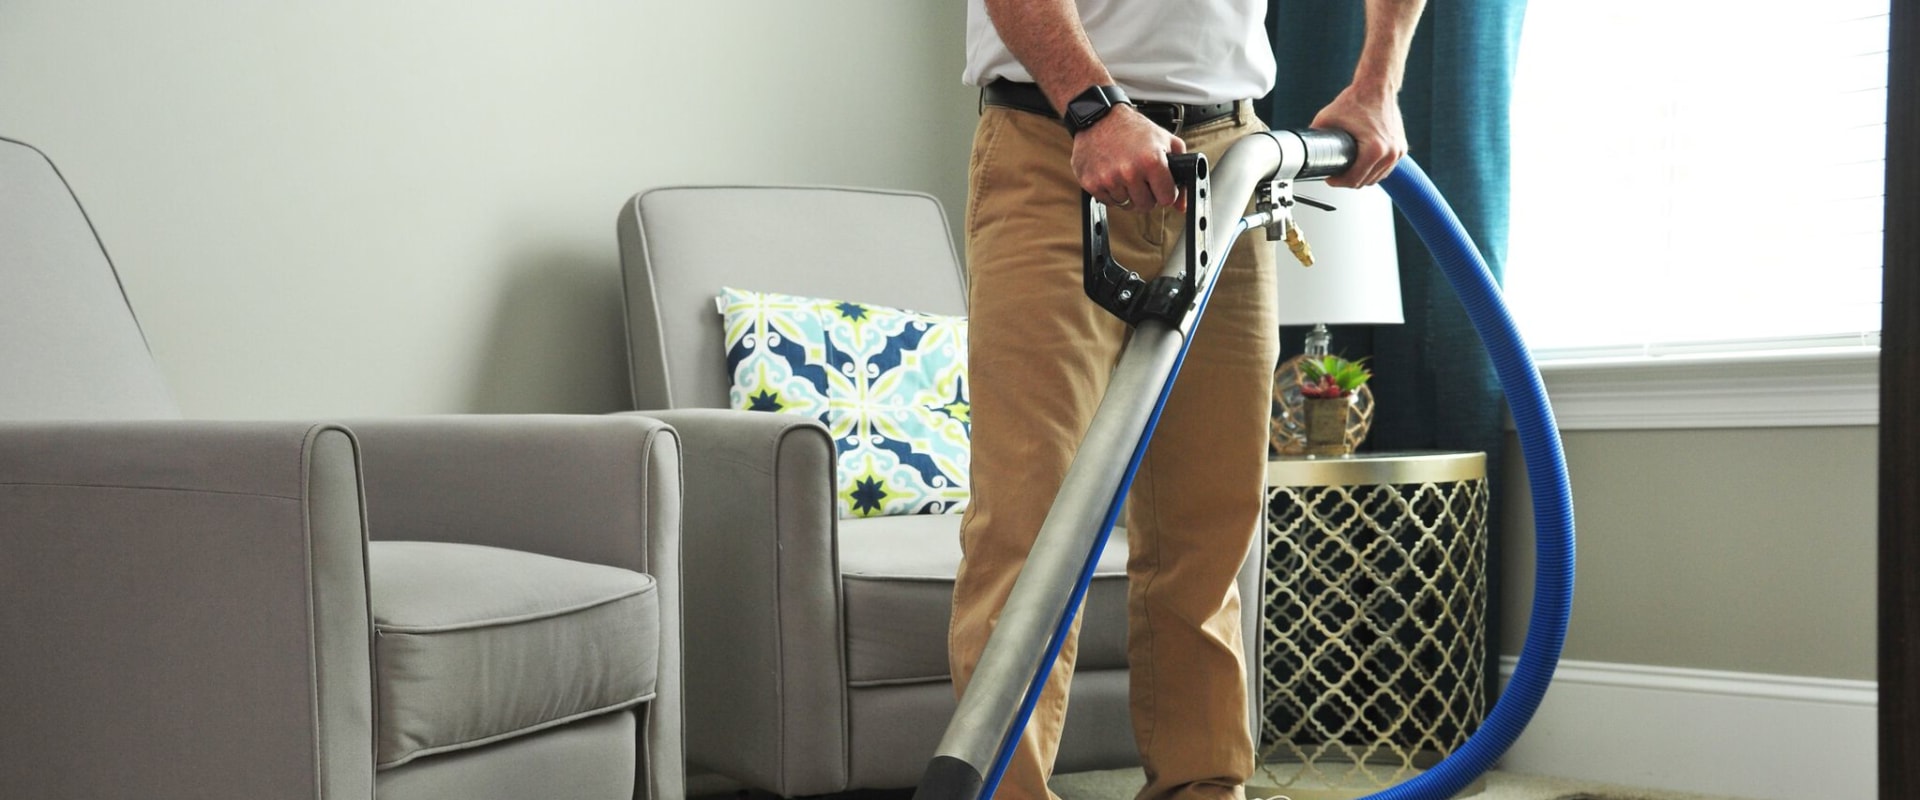 How much is a professional steam carpet cleaner?